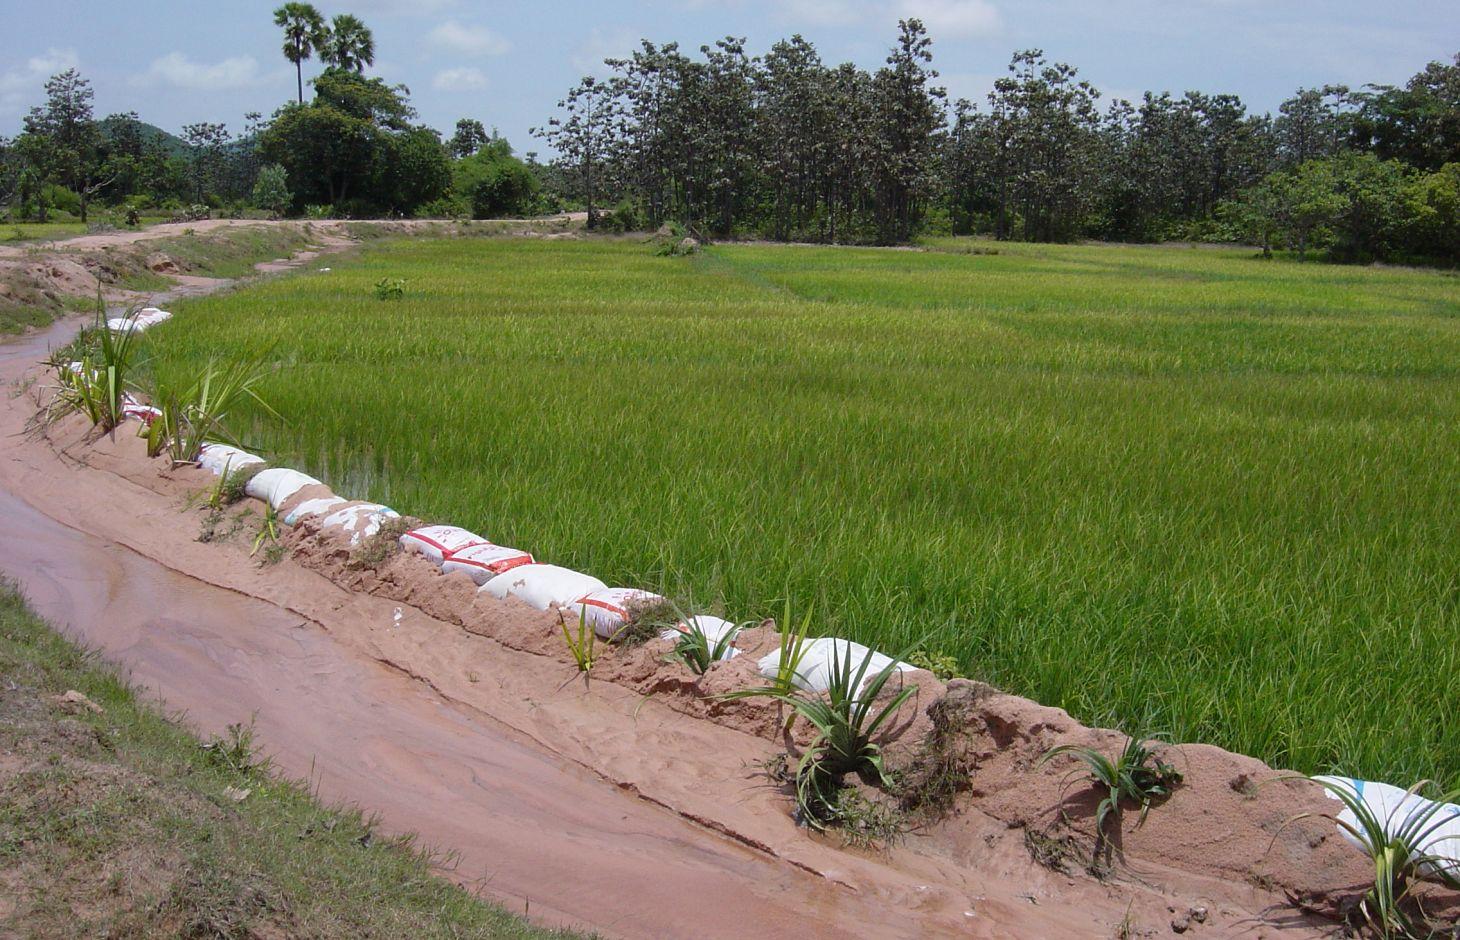 Recently stabilised dike with old rice bags and Pandanus, next to an irrigation channel and an eroding sand road.